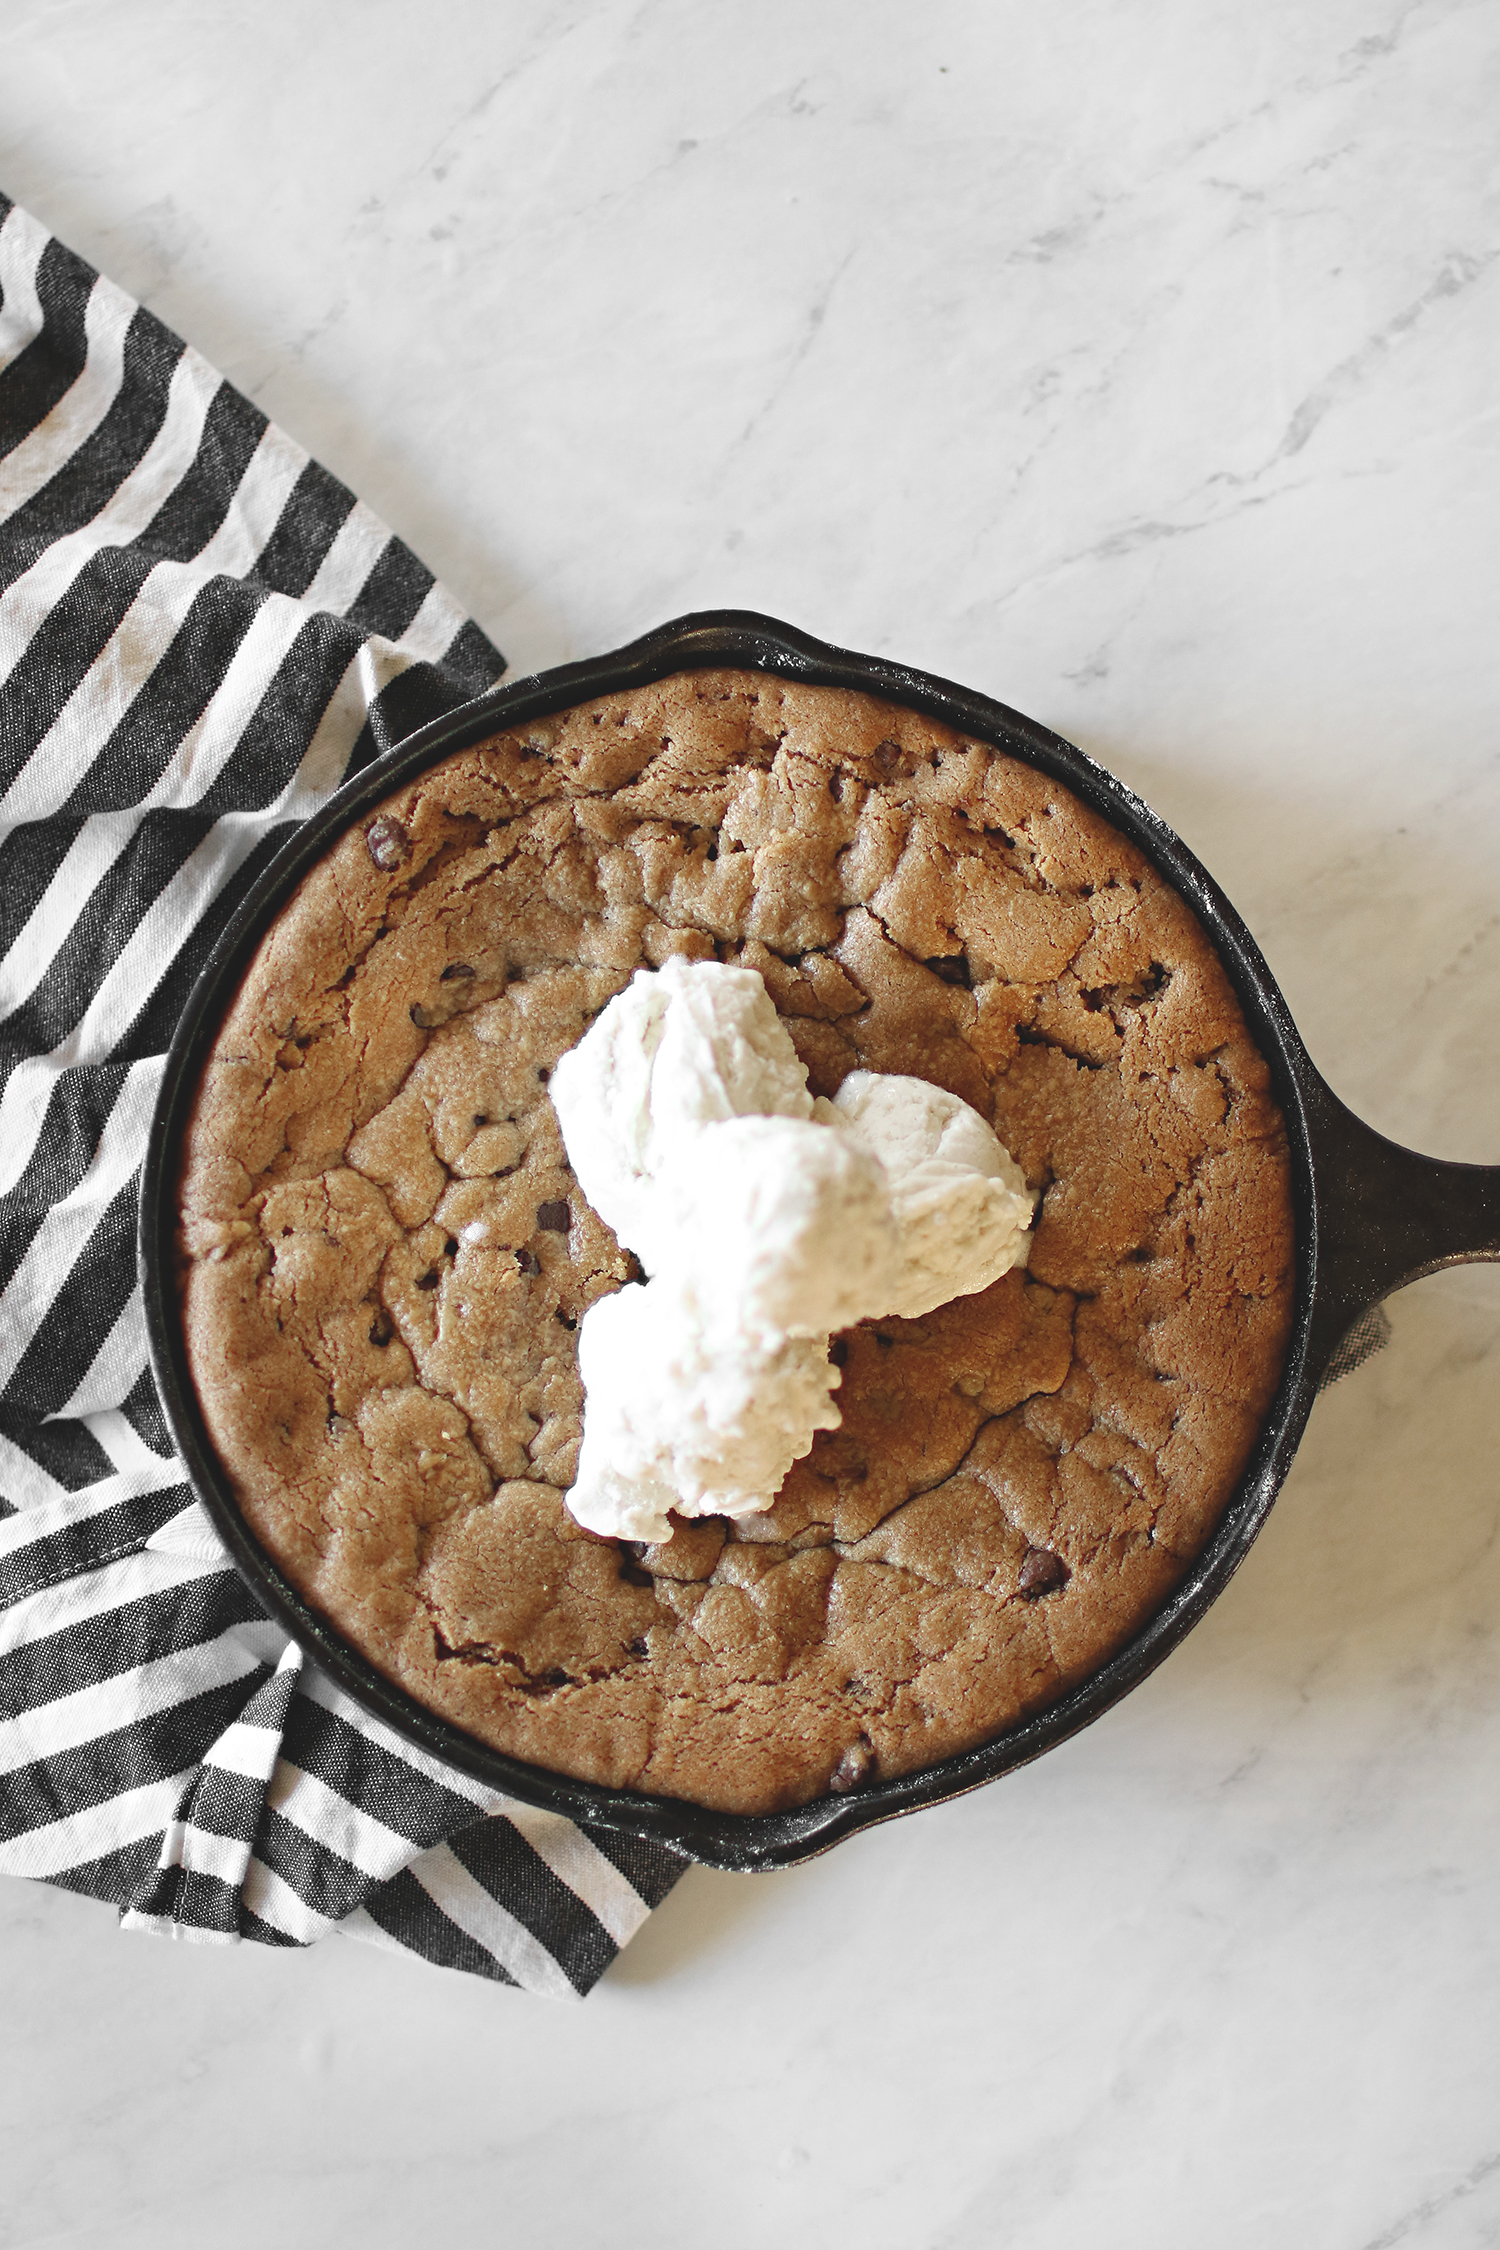 A dessert called Pazookie. An easy family recipe and one that is sure to become everyone's favorite! Catch the recipe over at Haus of Layne #Recipe #Dessert